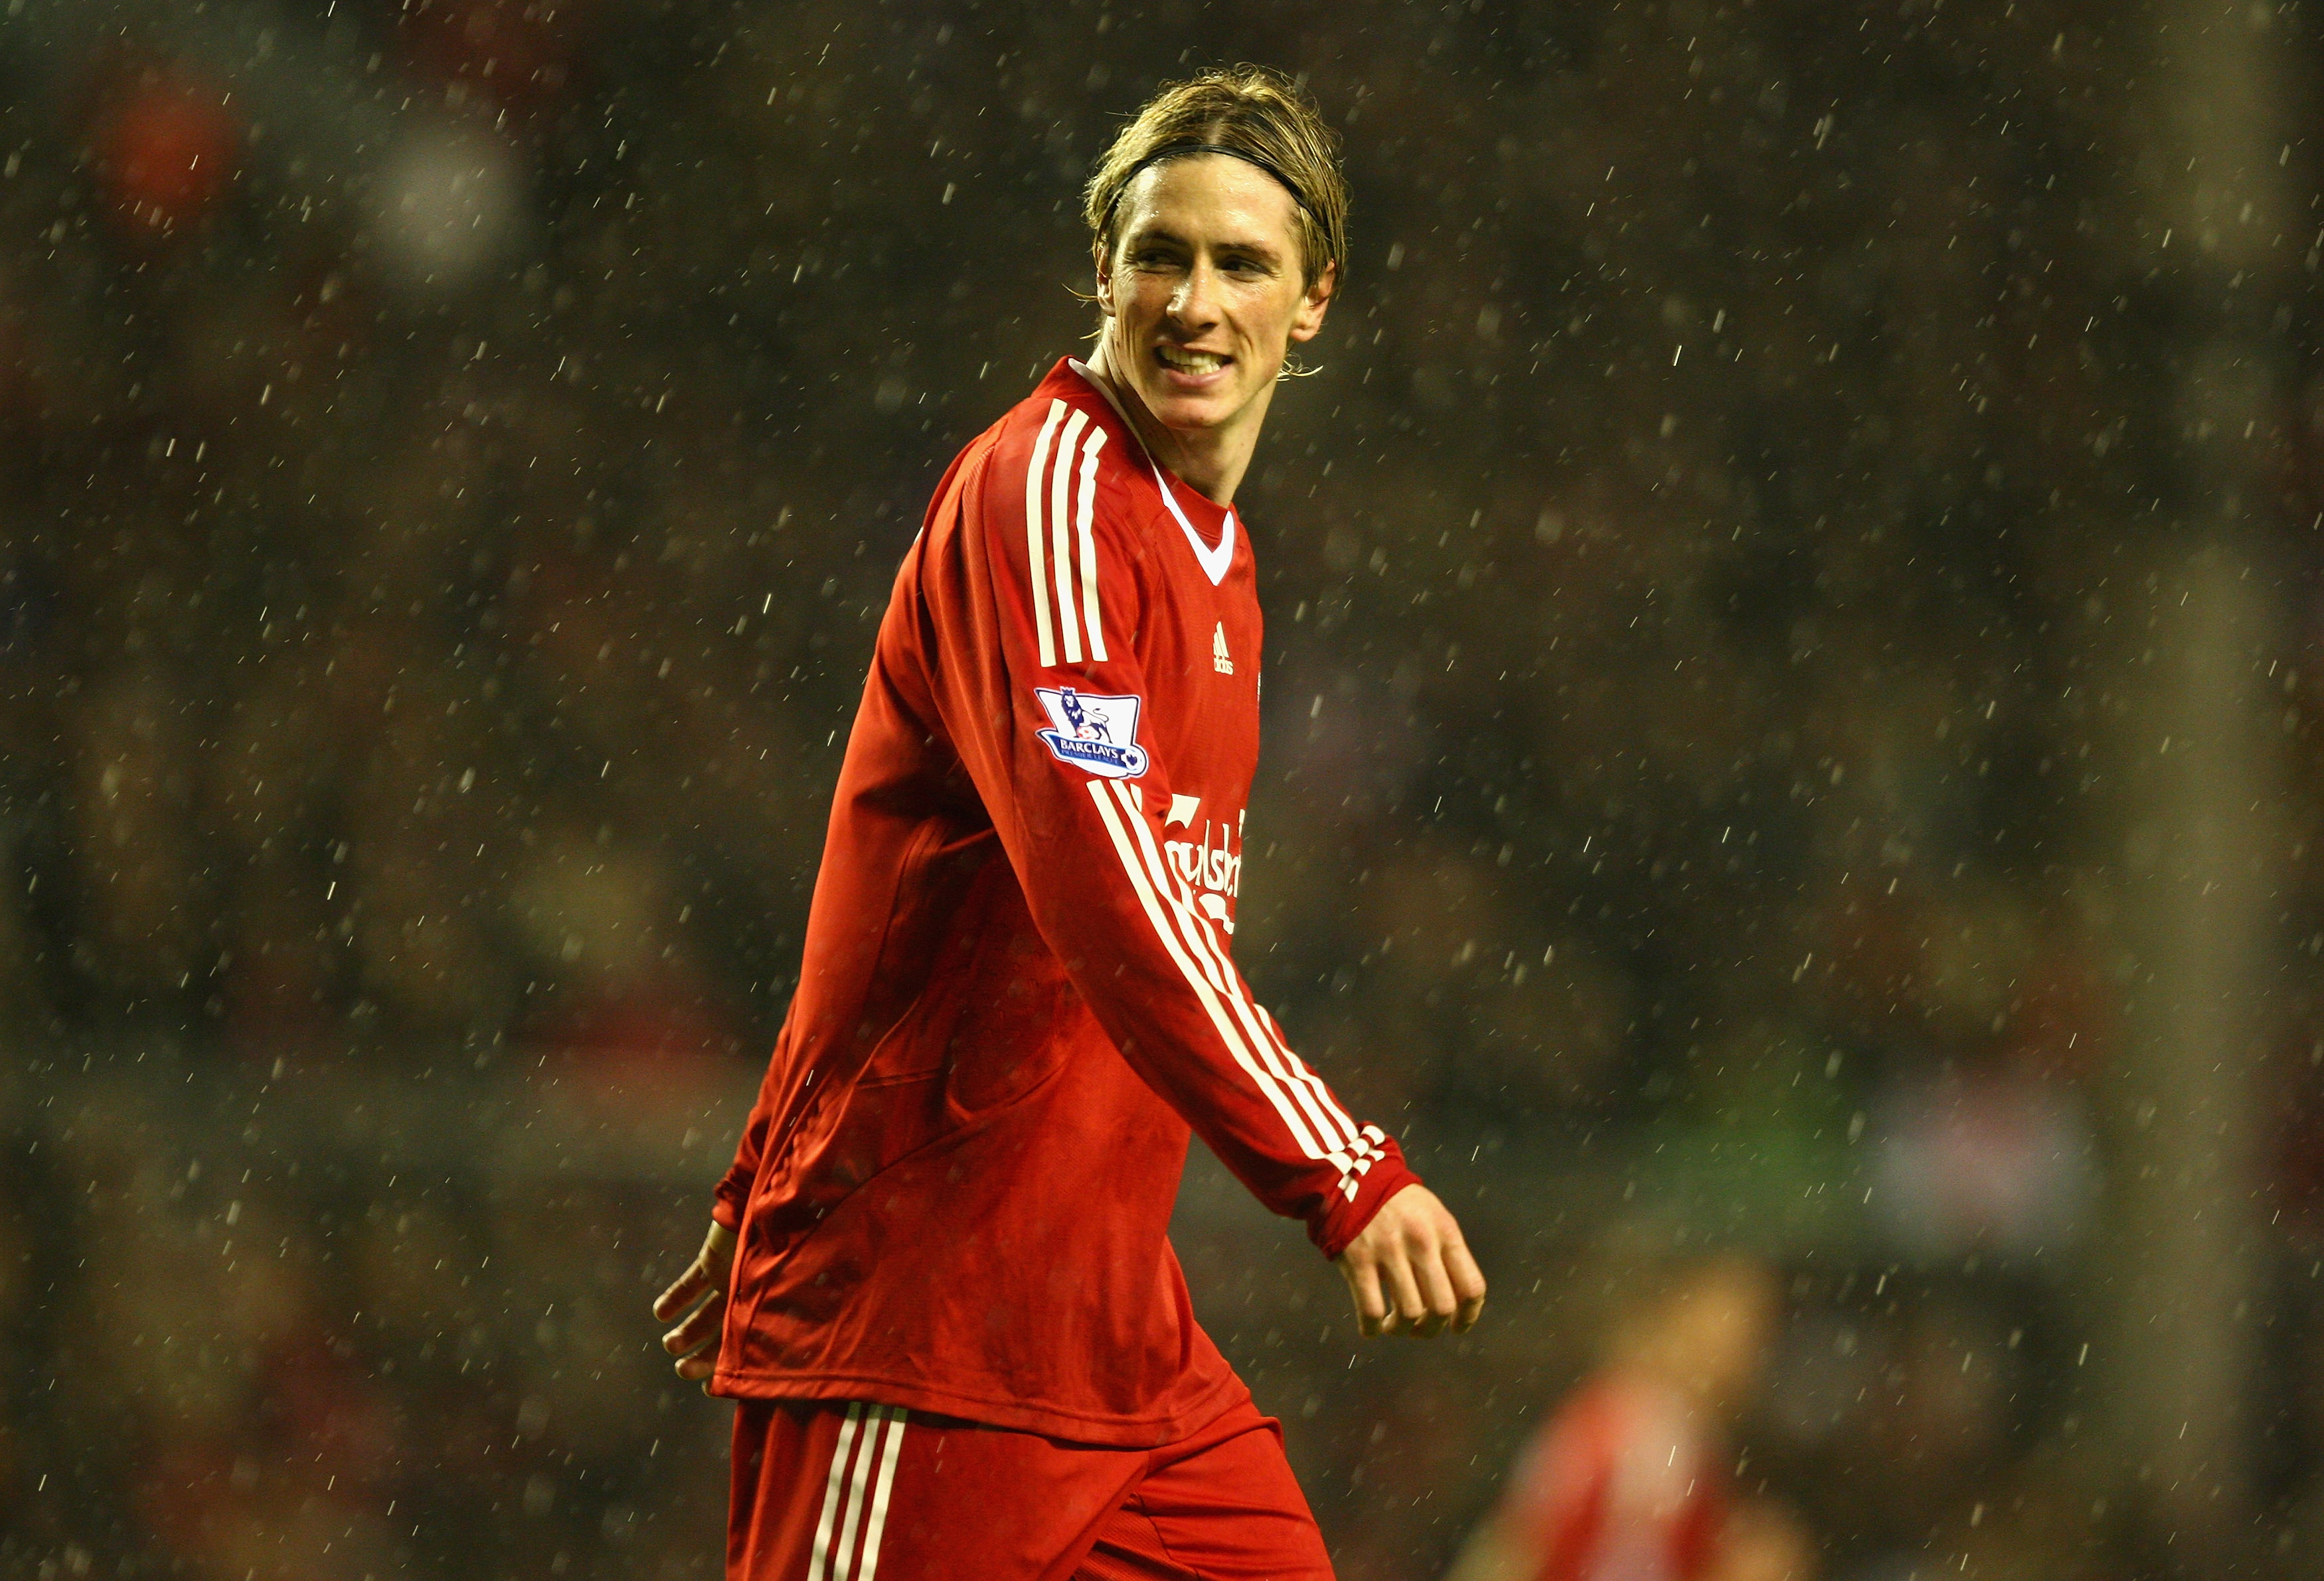 LIVERPOOL, ENGLAND - DECEMBER 26:   Fernando Torres of Liverpool looks on during the Barclays Premier League match between Liverpool and Wolverhampton Wanderers at Anfield on December 26, 2009 in Liverpool, England. (Photo by Clive Brunskill/Getty Images)